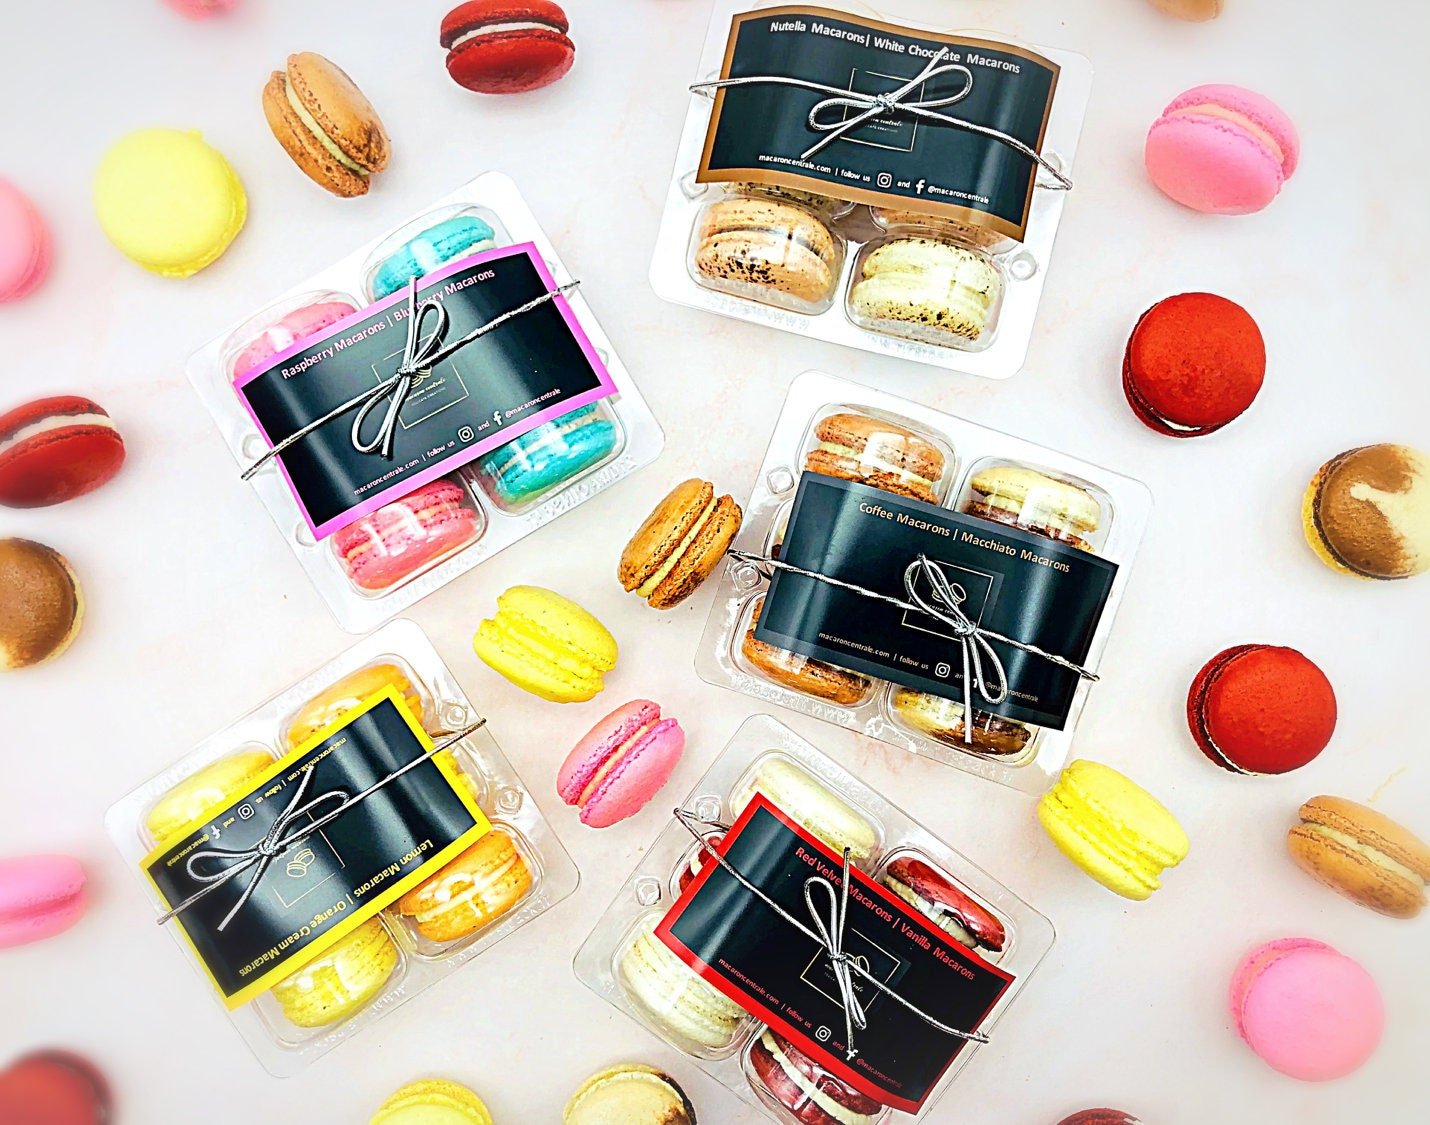 Choose Your Own 6 Macaron Value Pack - Macaron Centrale1 Flavor